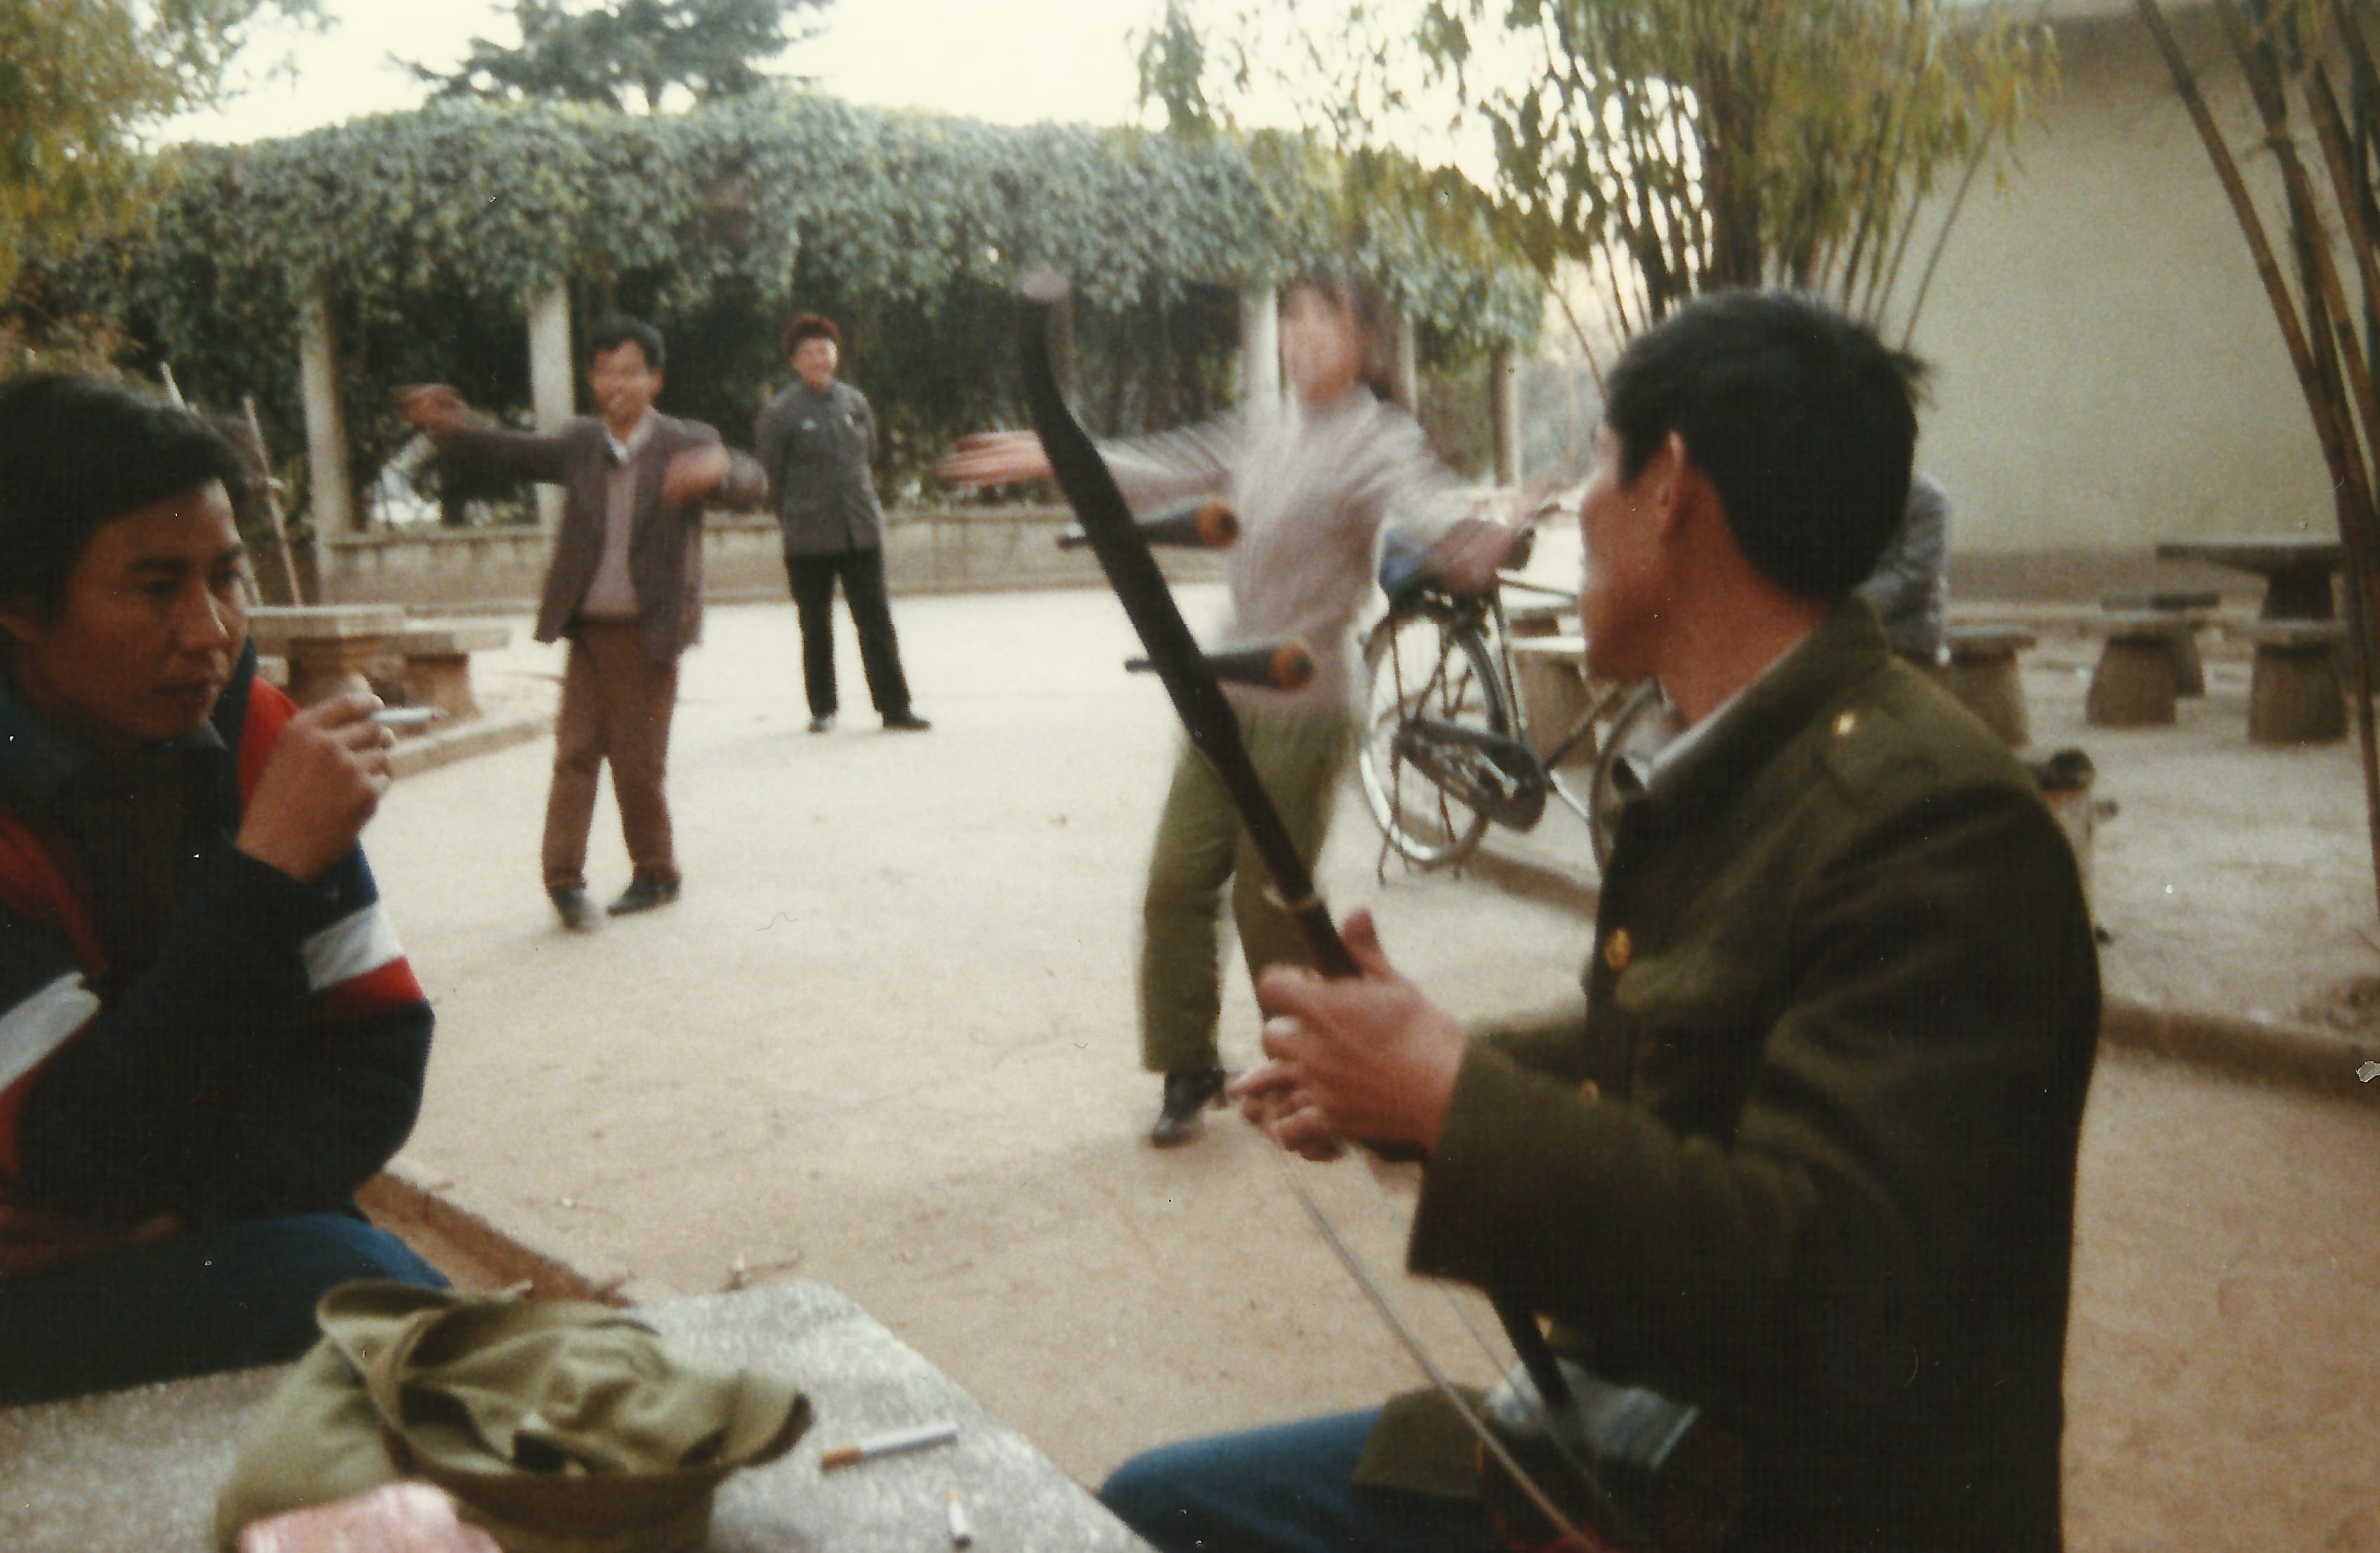 Kunming. Erhu player with people dancing in the background.